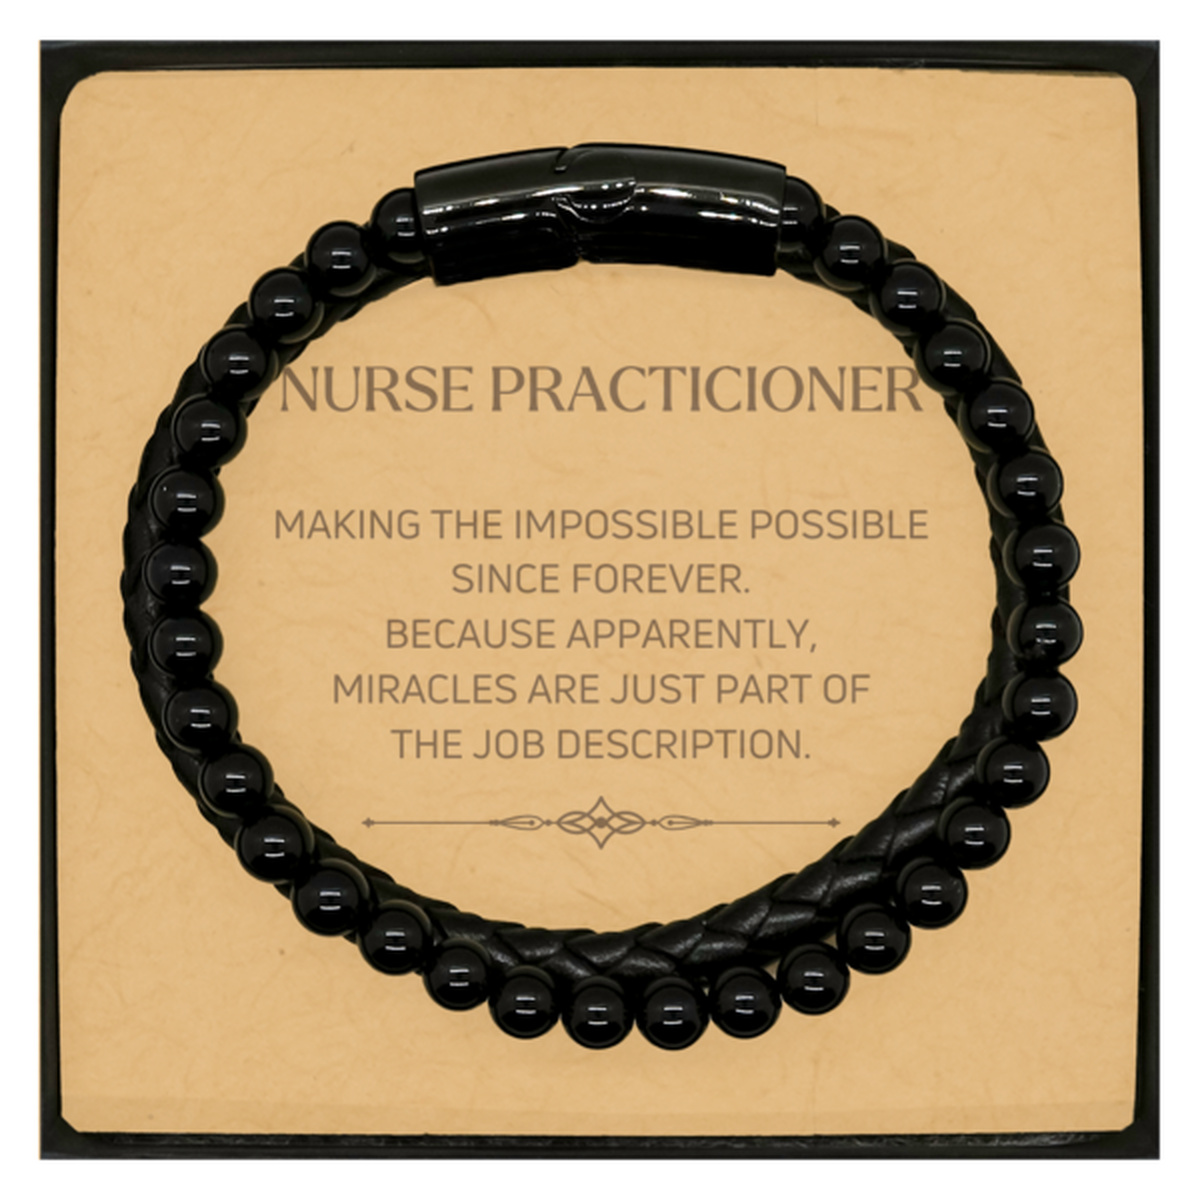 Funny Nurse Practicioner Gifts, Miracles are just part of the job description, Inspirational Birthday Christmas Stone Leather Bracelets For Nurse Practicioner, Men, Women, Coworkers, Friends, Boss